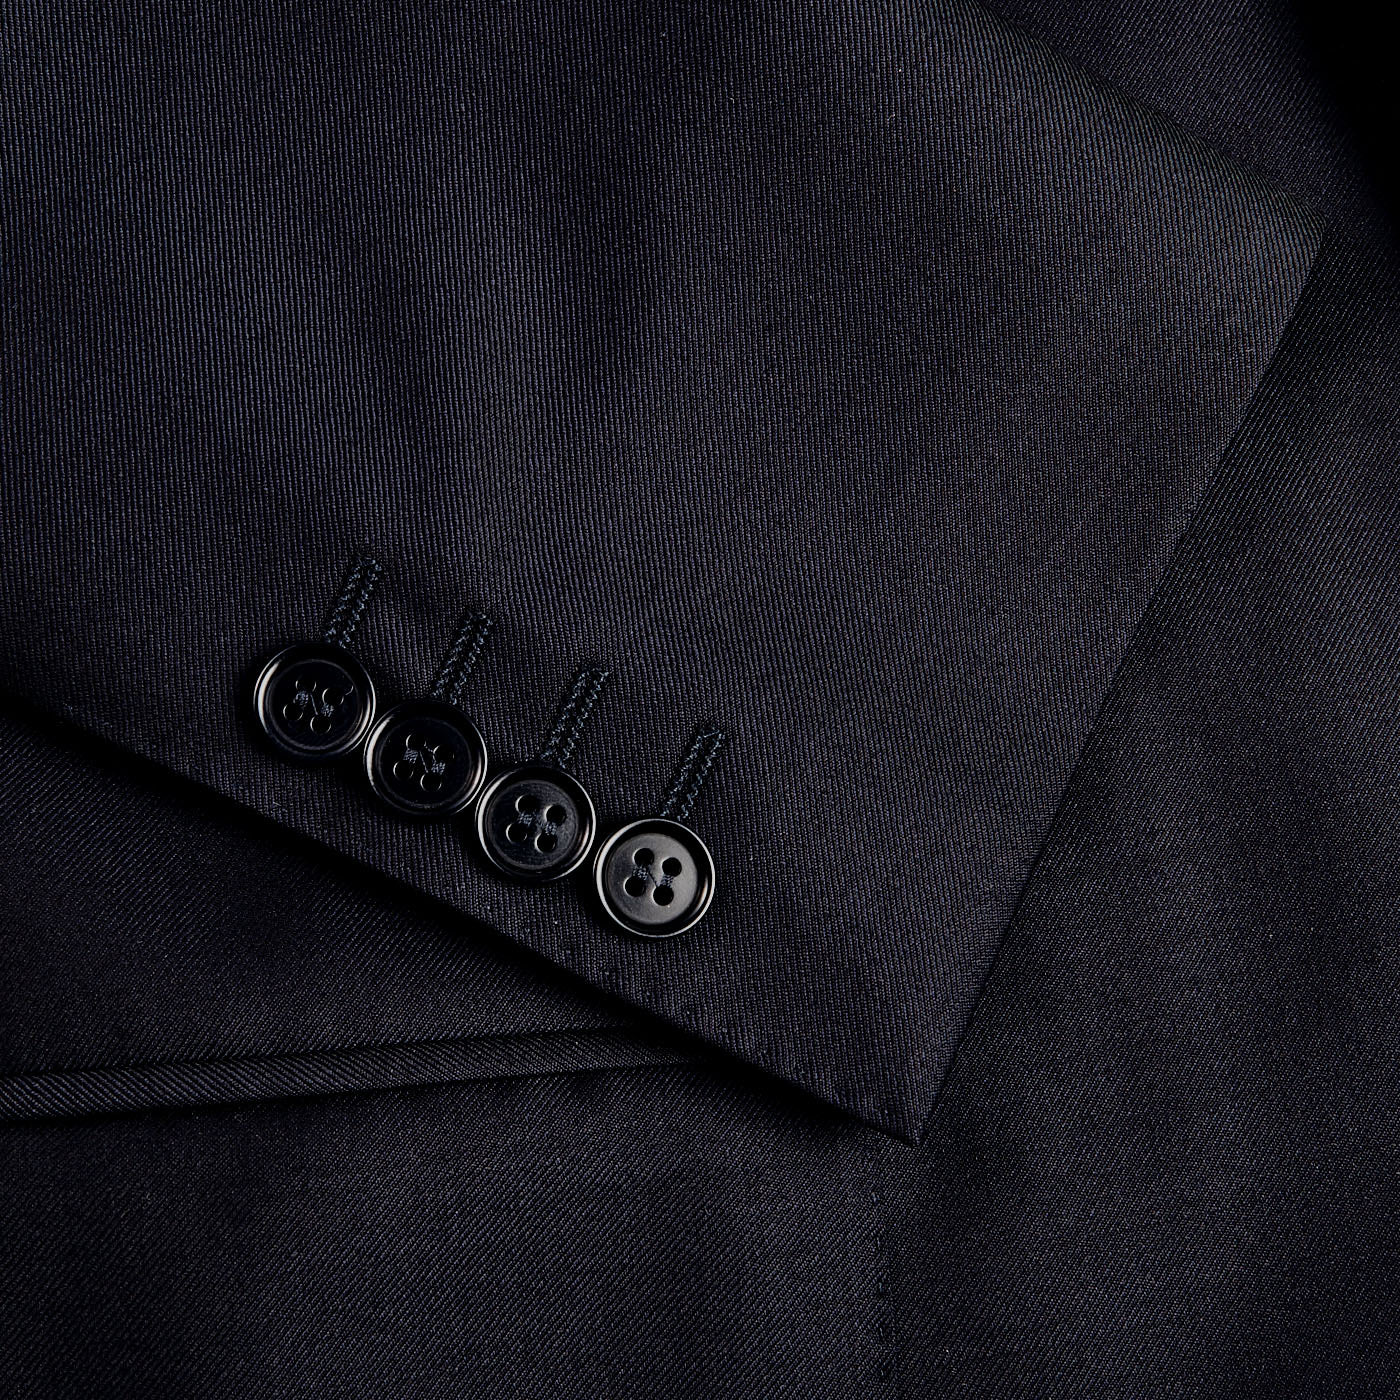 A close up of a button on a Canali Navy Blue Wool Notch Lapel Suit.